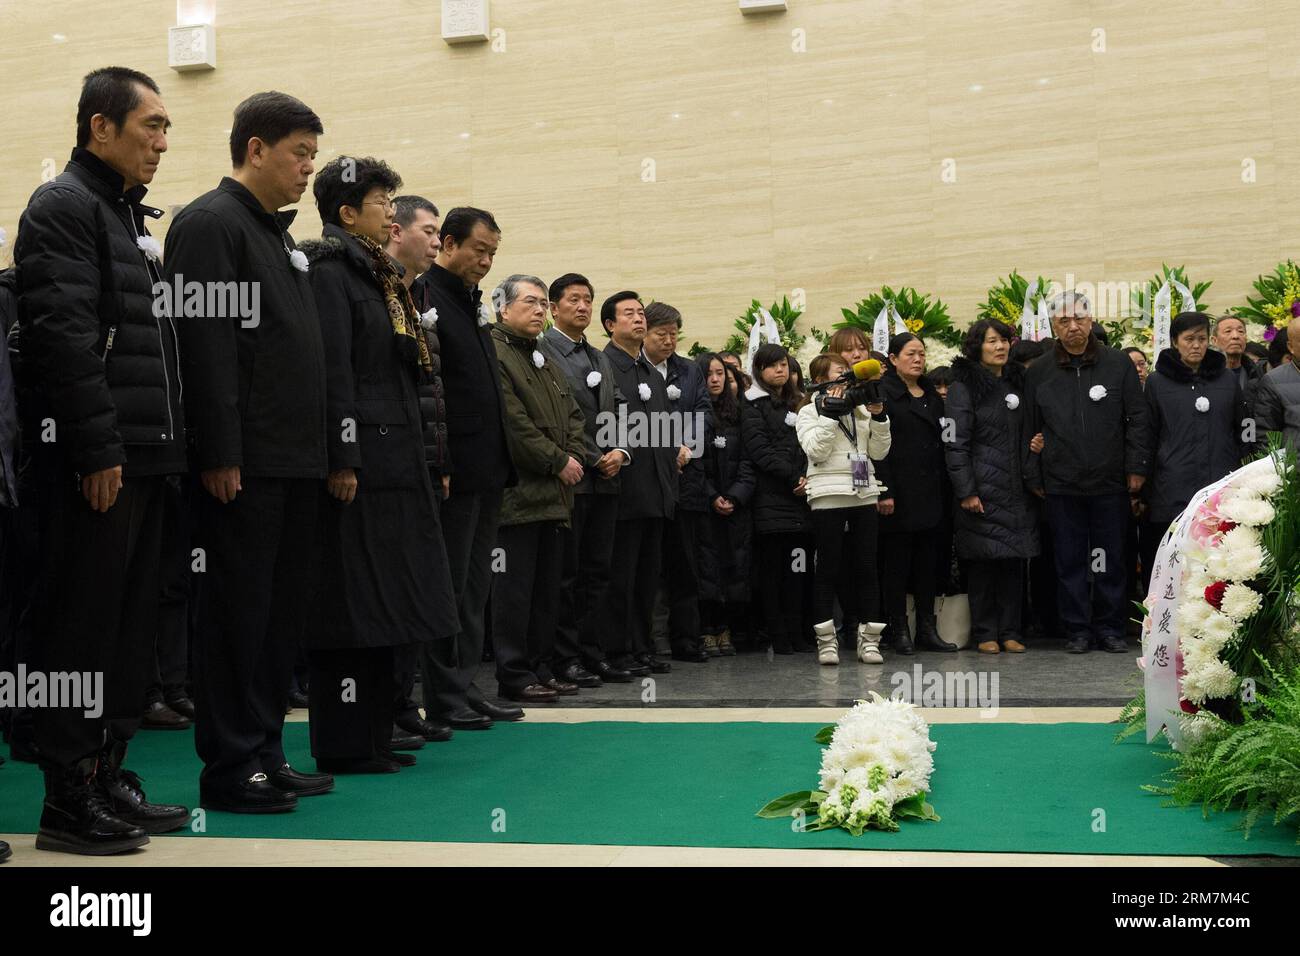 Film directors Zhang Yimou (1st L) and Feng Xiaogang (4th L) mourn for the late film director Wu Tianming at a memorial service held at the Babaoshan Funeral Home in Beijing, capital of China, March 8, 2014. Wu Tianming, who died of a heart attack on March 4 at the age of 75, was a leading figure of China s Fourth Generation film directors. While he was head of the renowned Xi an Film Studio, Wu spotted talents such as Zhang Yimou and Gu Changwei who later became representatives of China s Fifth Generation film directors. His major works include Old Well and Life . (Xinhua/Wu Kaixiang) (lmm) C Stock Photo